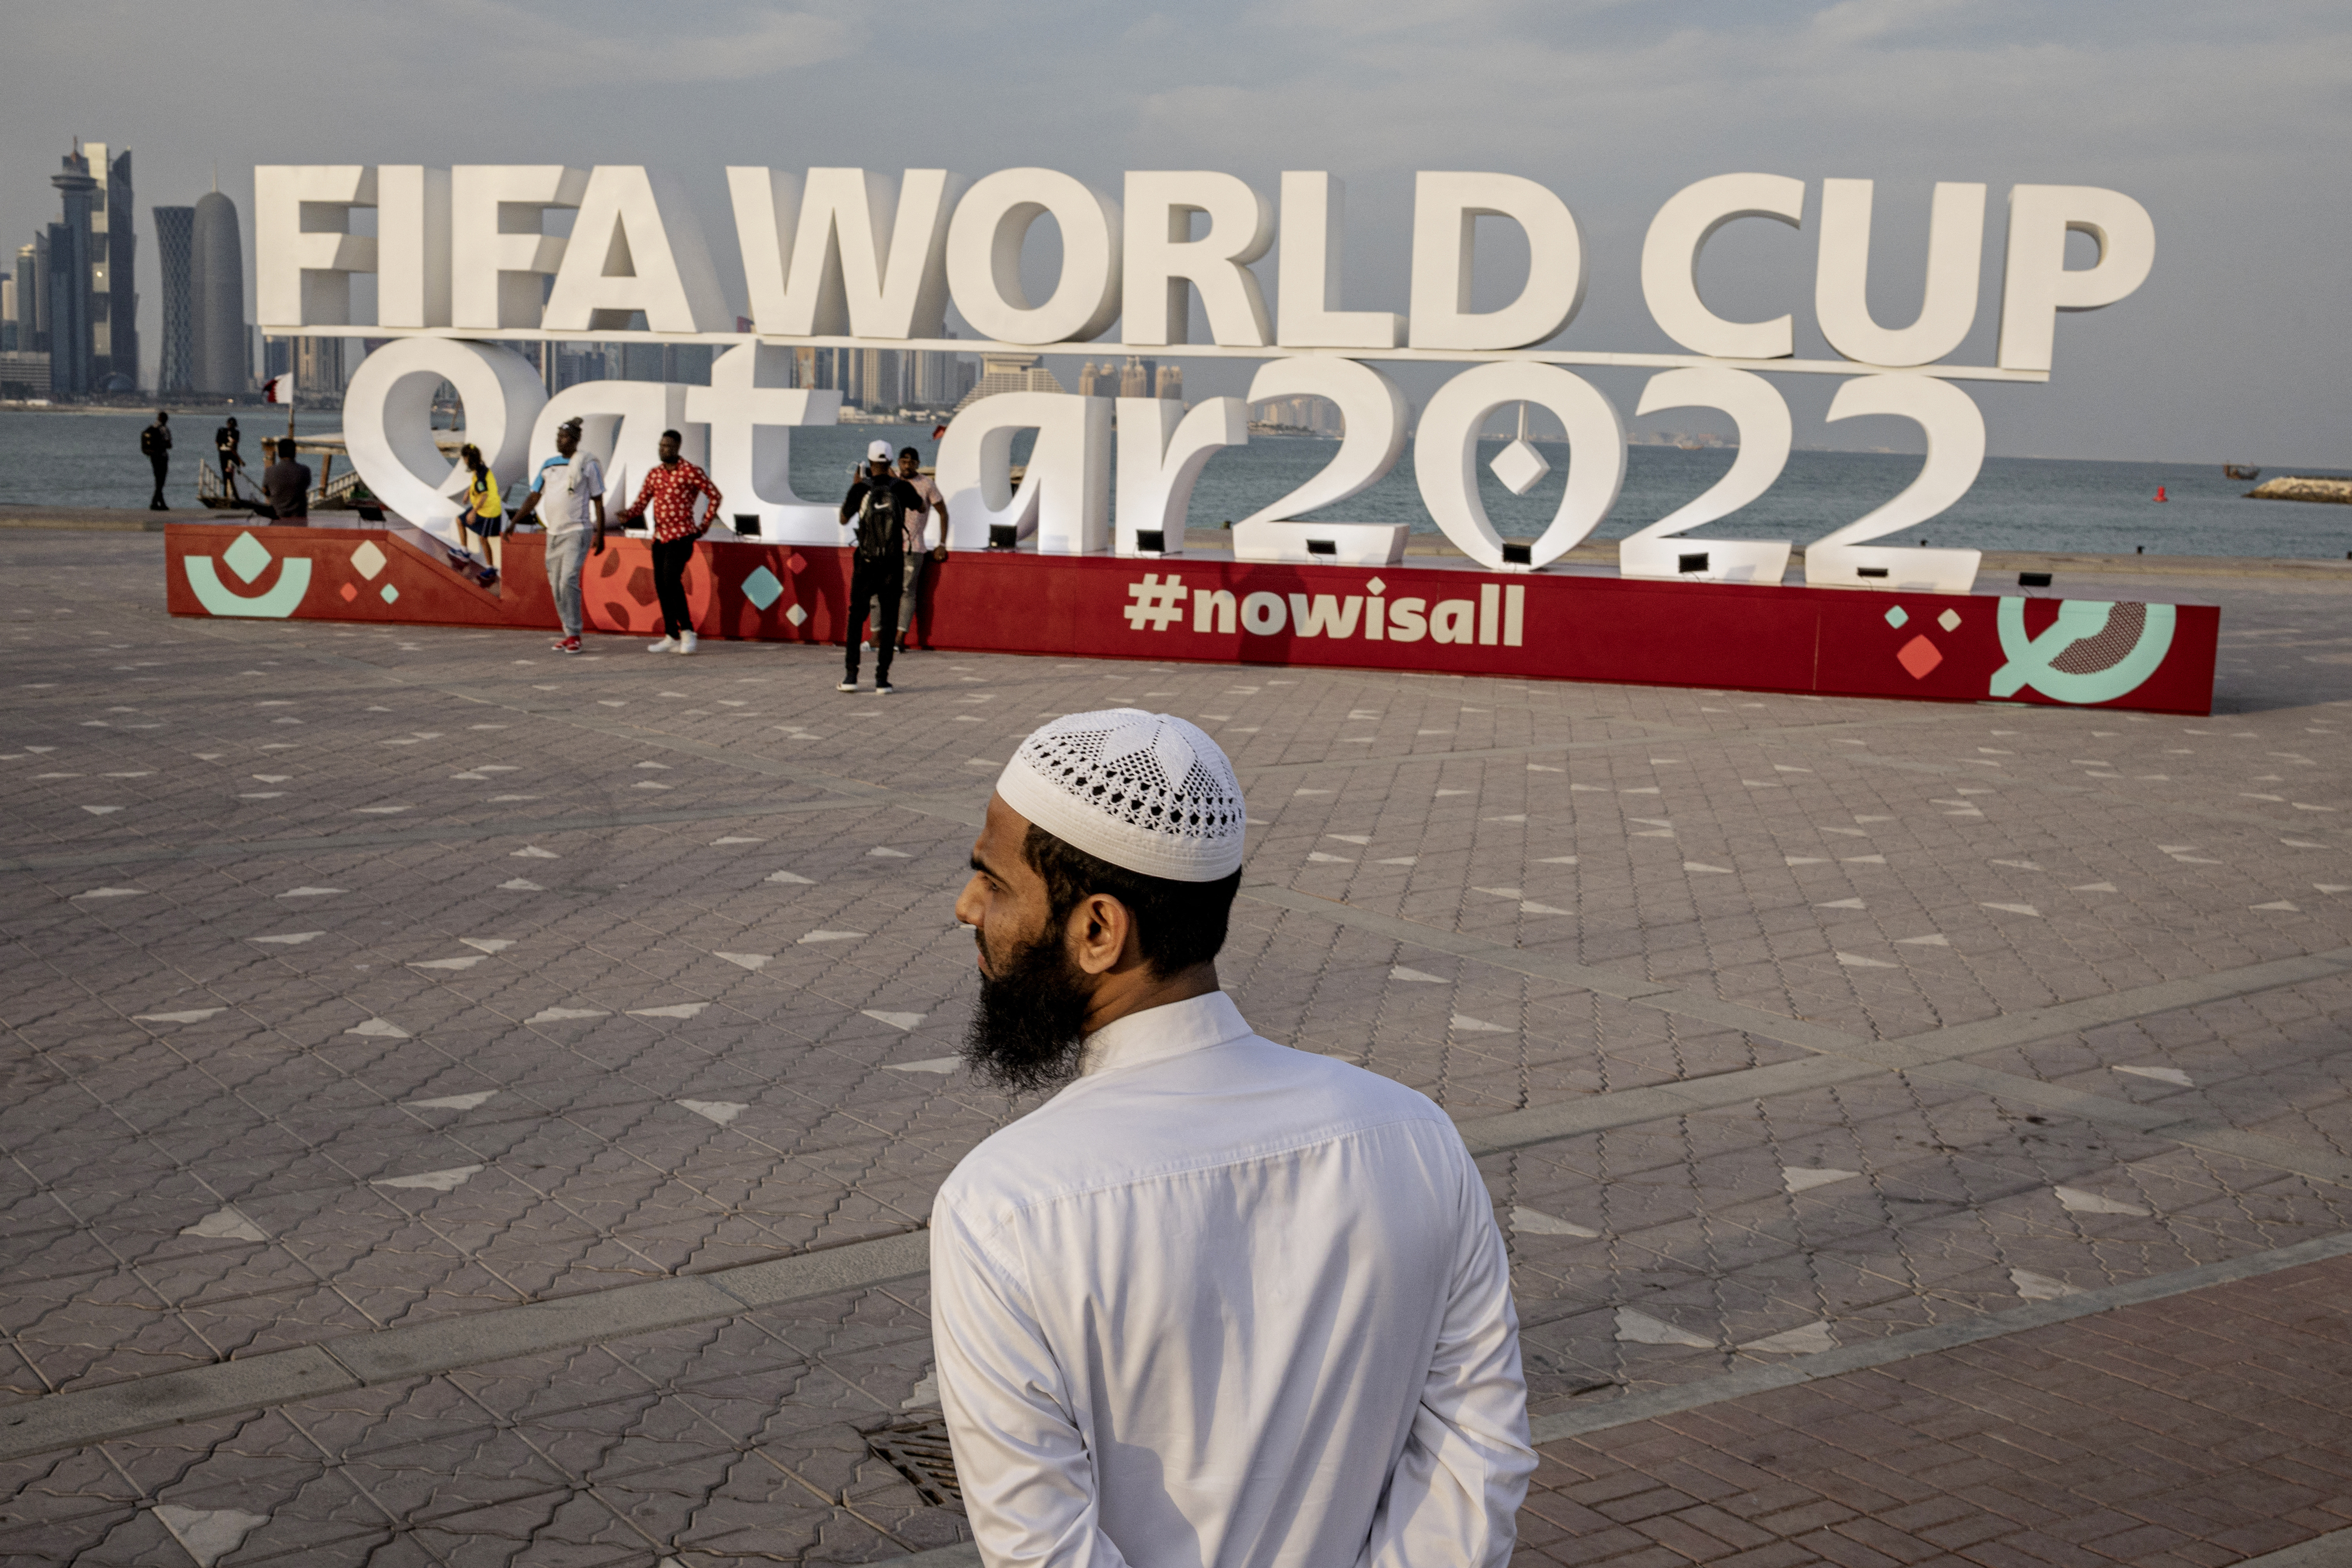 2022 Qatar World Cup Is Already Looking Like Quite a PR Mess